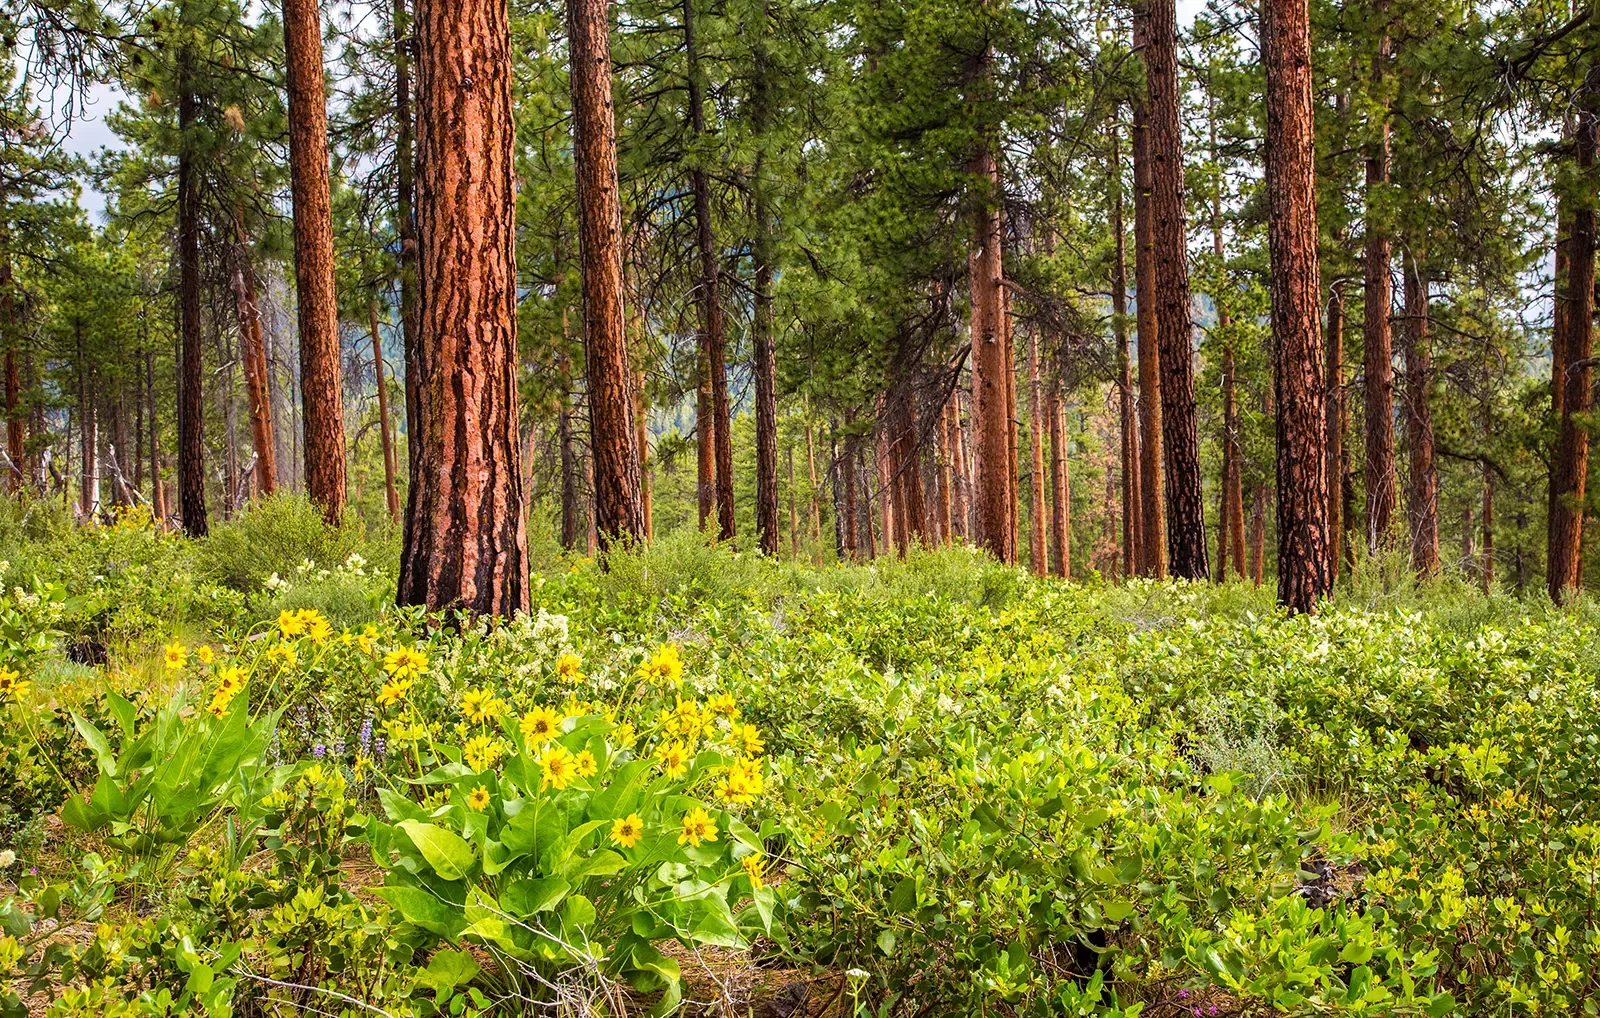 Shot of a large forest with small, yellow-flowered bushes below.